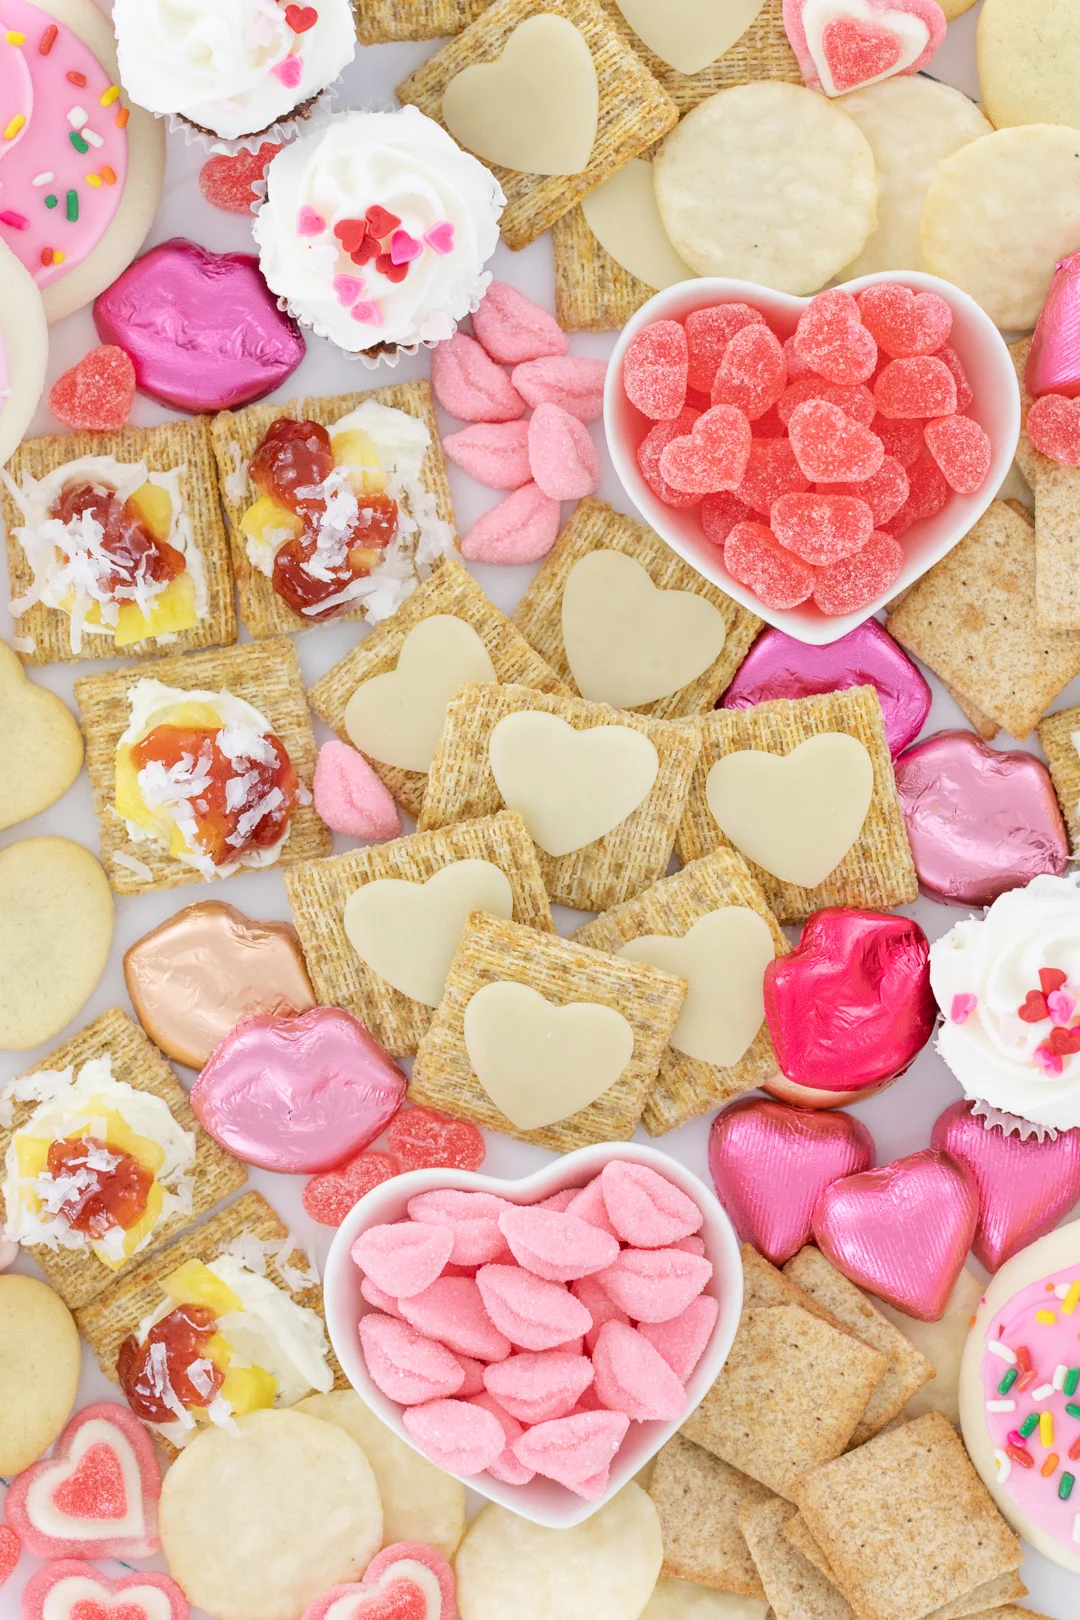 pretty snack board with heart shaped cookies and candies